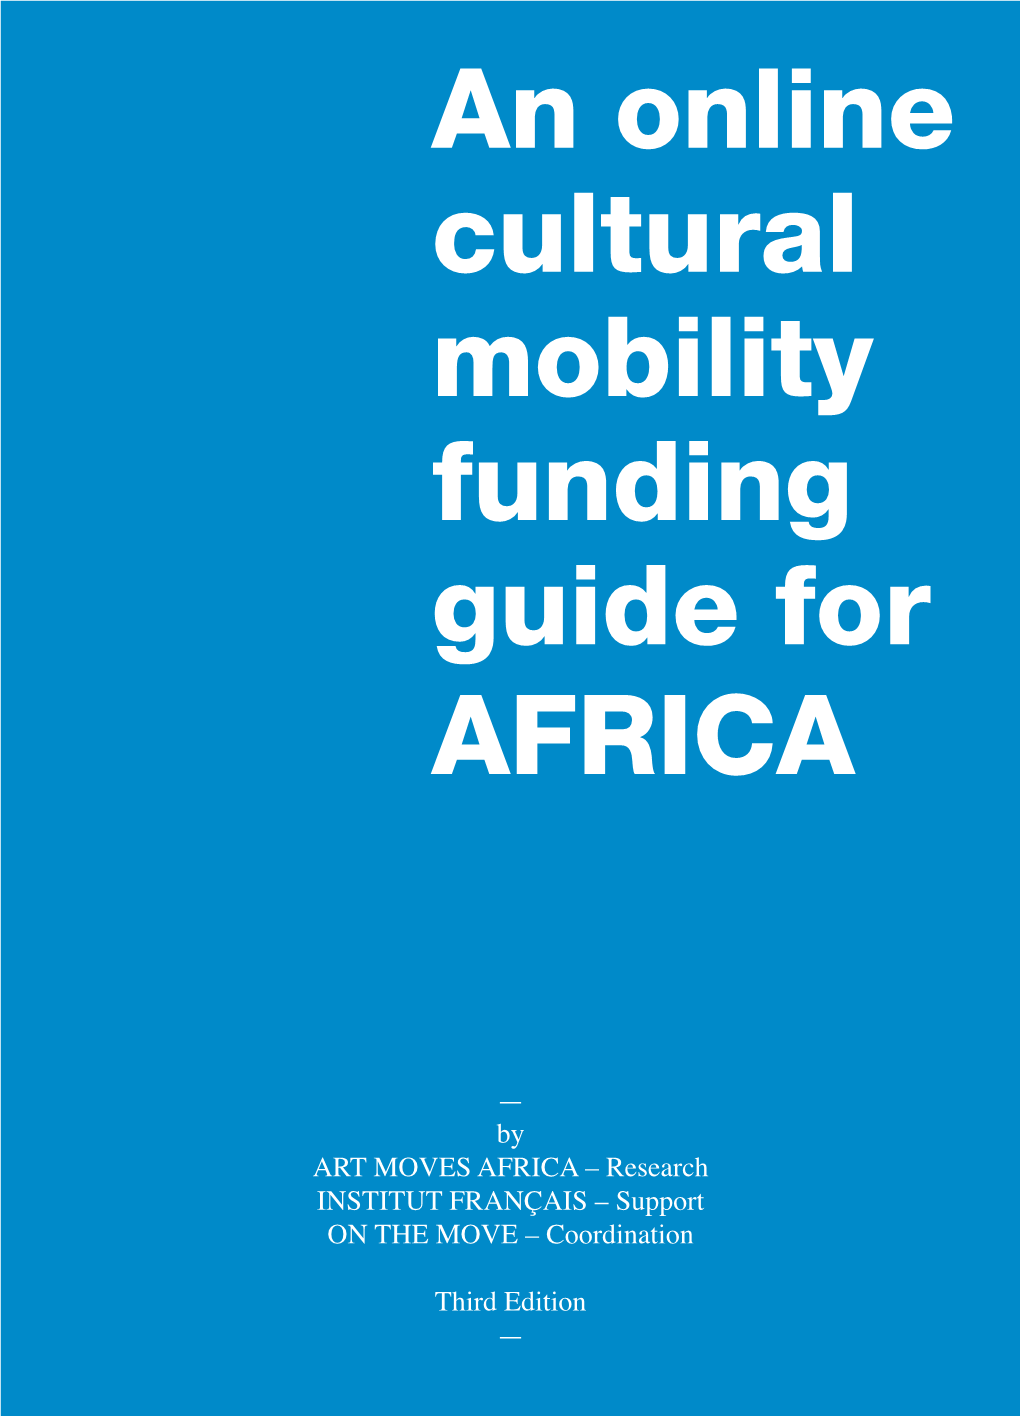 An Online Cultural Mobility Funding Guide for AFRICA